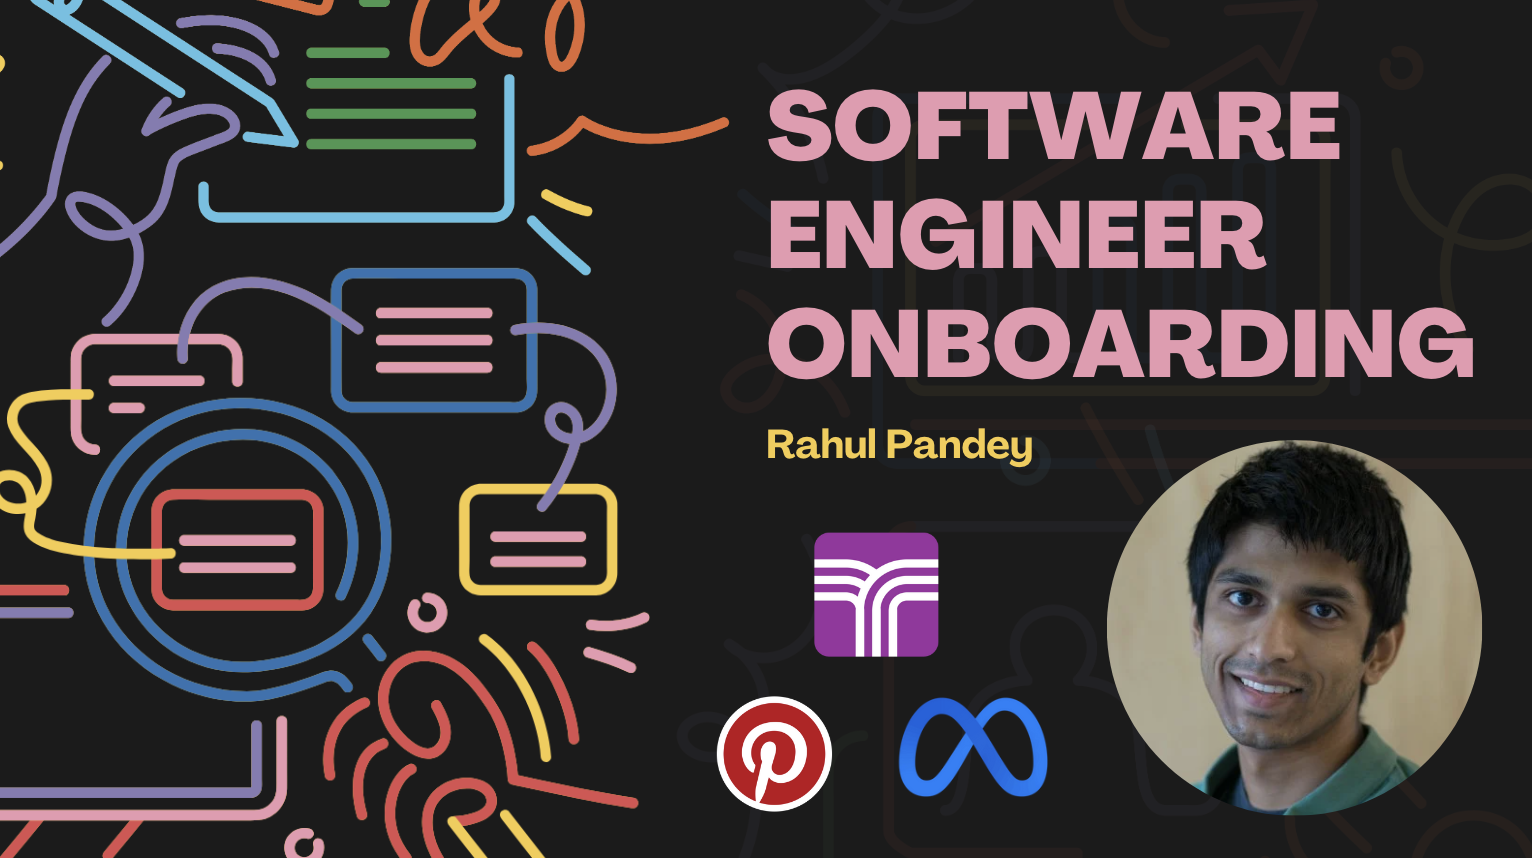 The Complete Onboarding Guide For Software Engineers: Succeeding When You're New poster